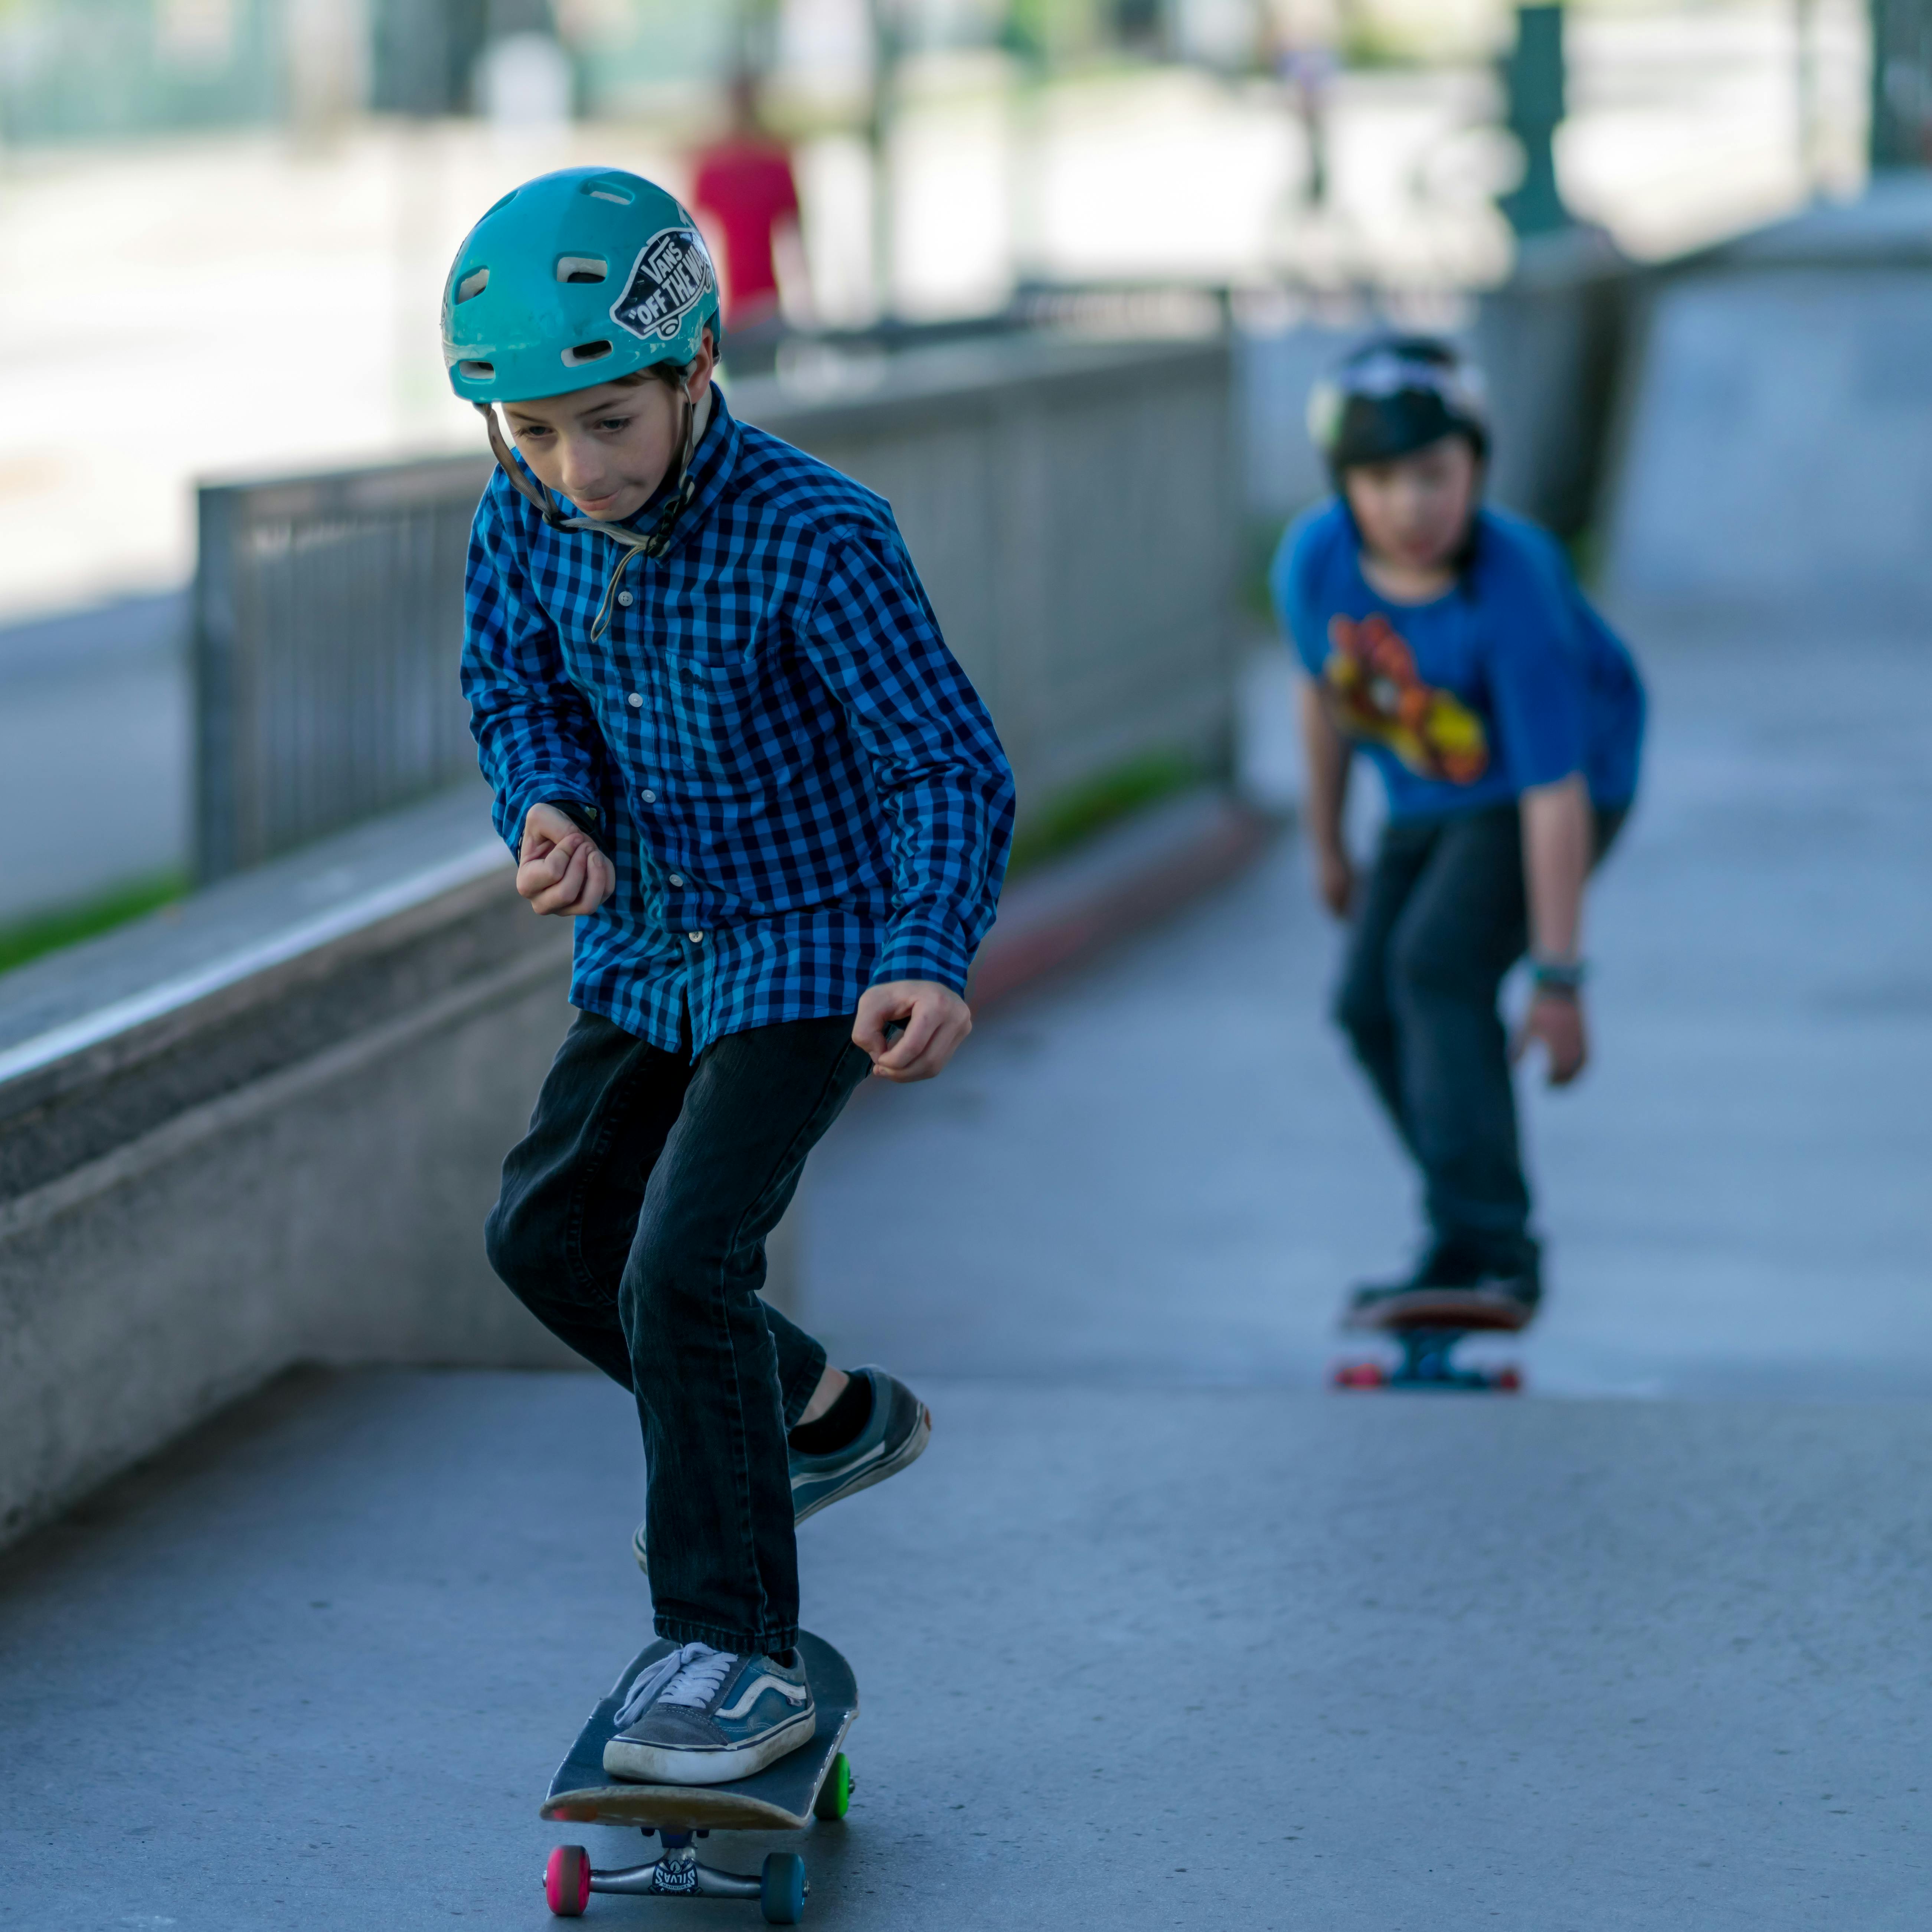 Two young boys skateboarding at Plaza